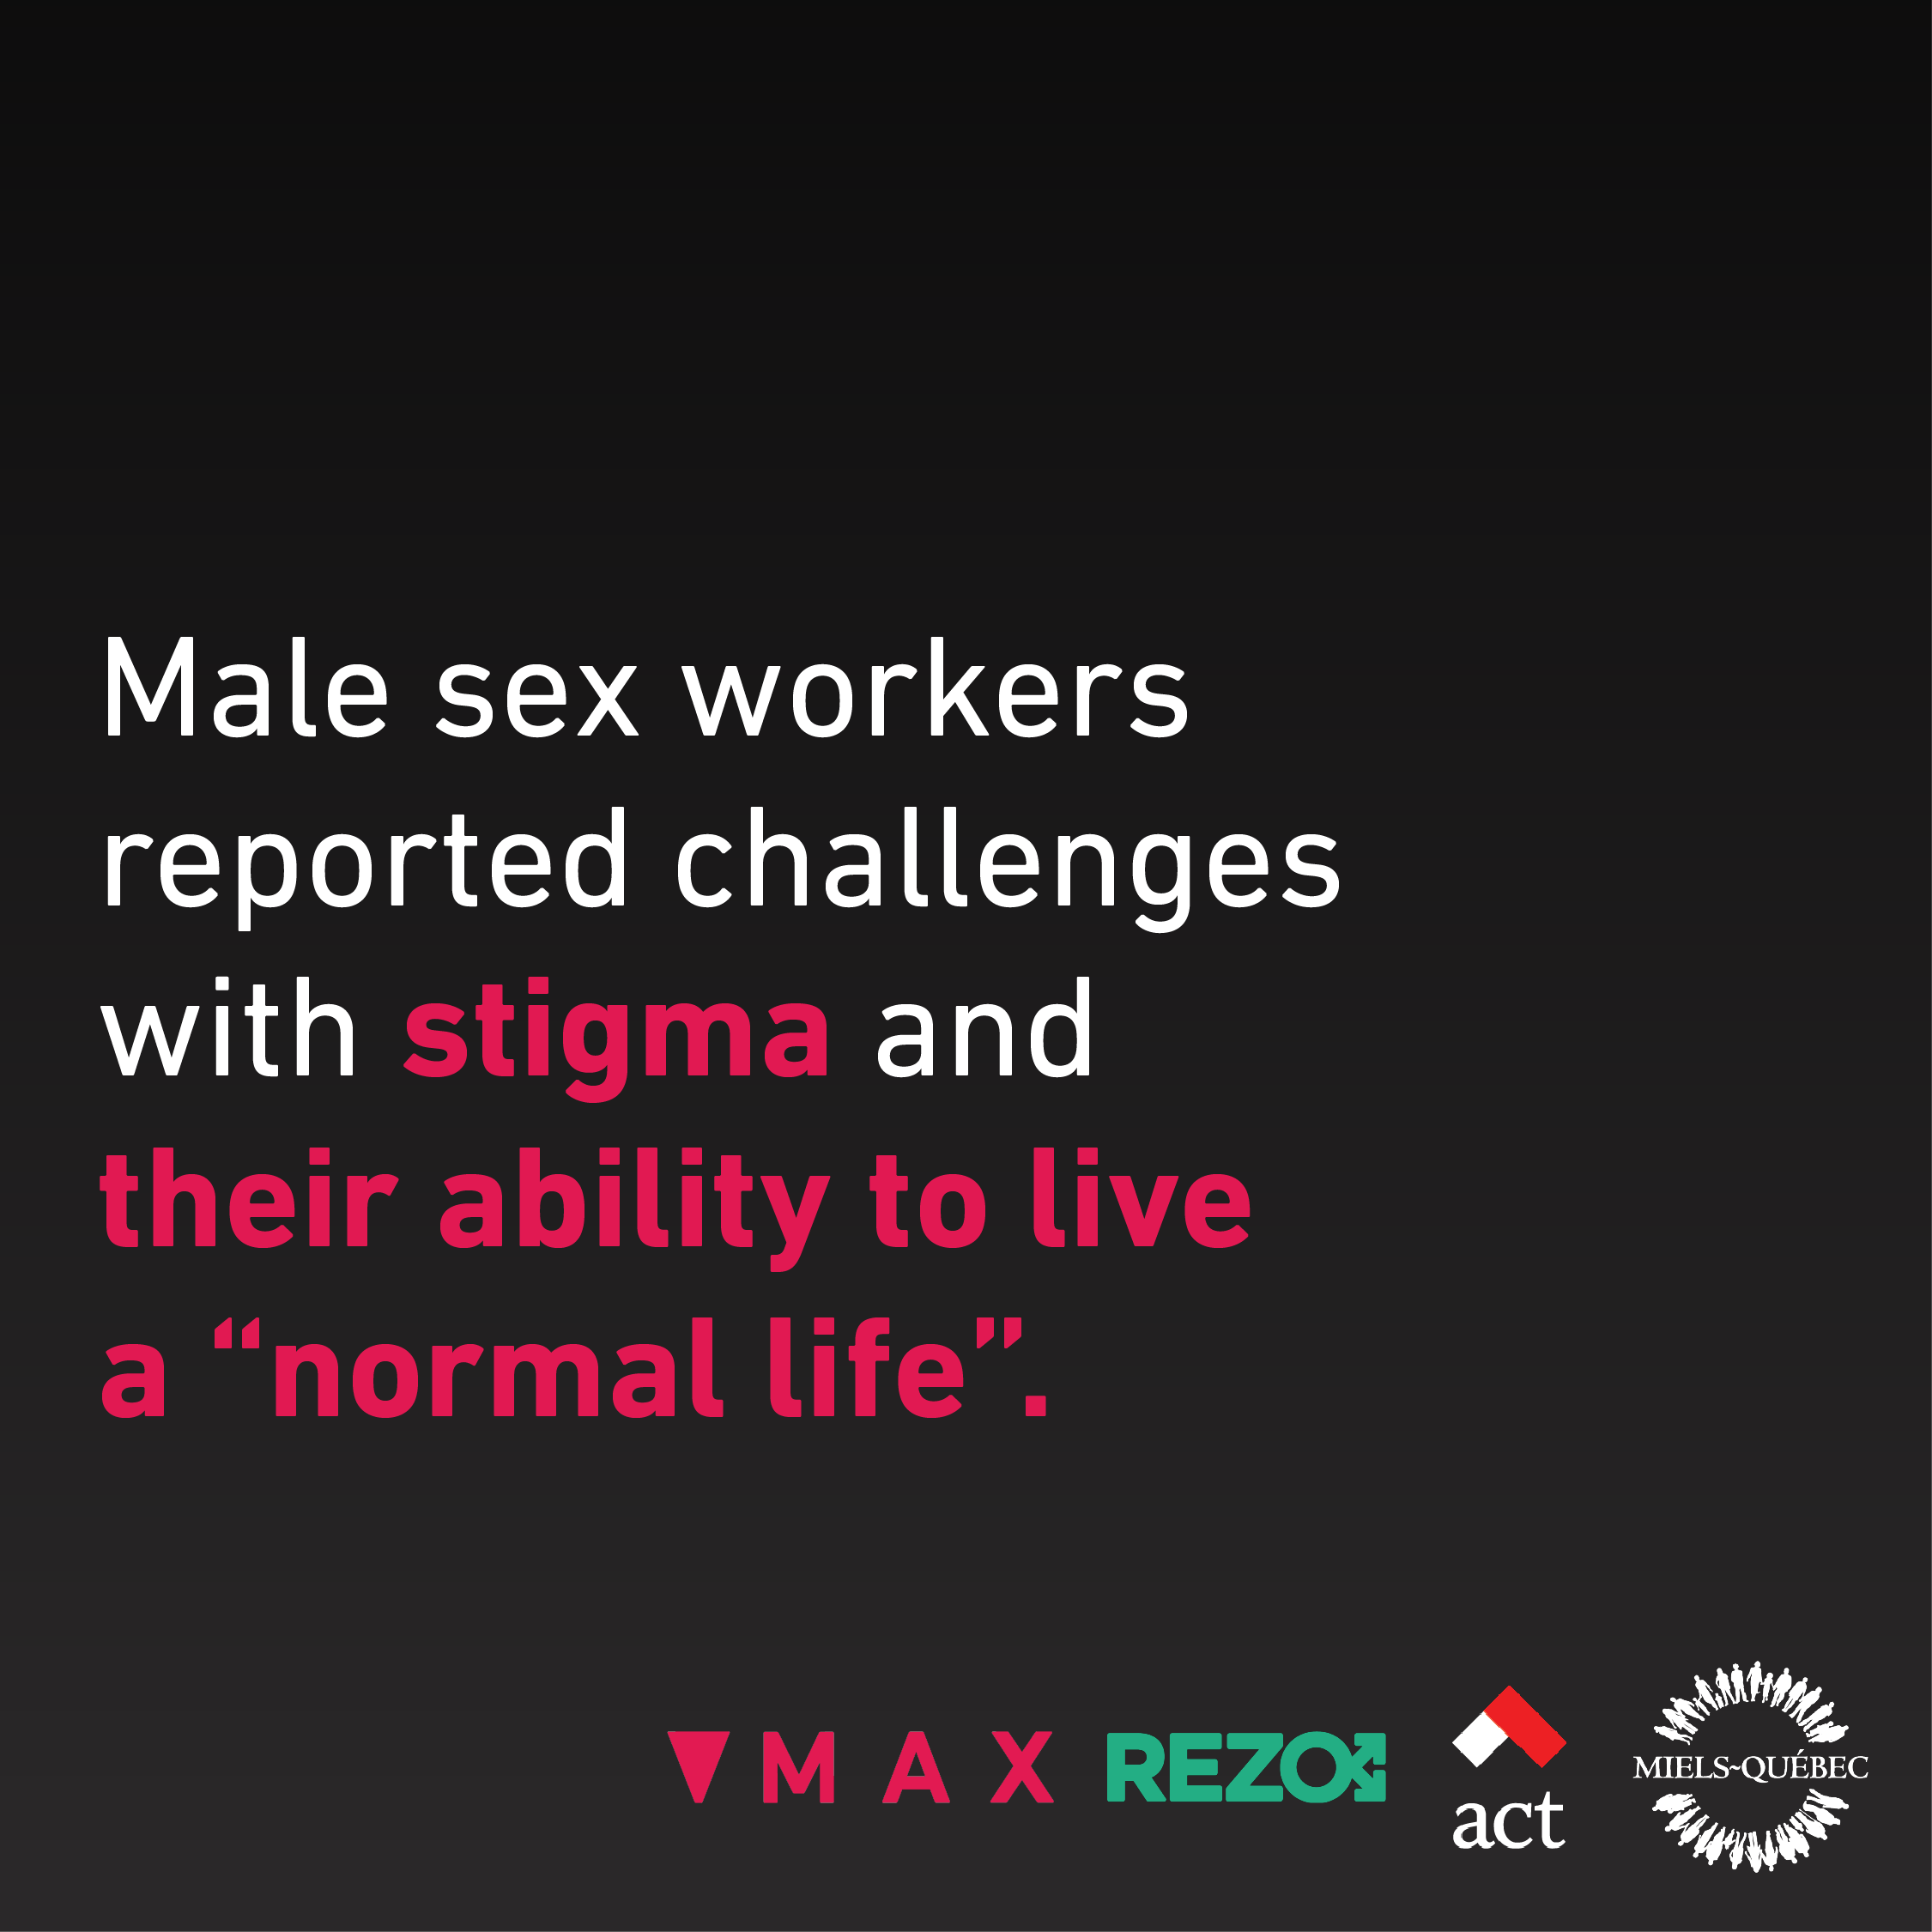 Male sex workers reported challenges with stigma and their ability to live a “normal life,”